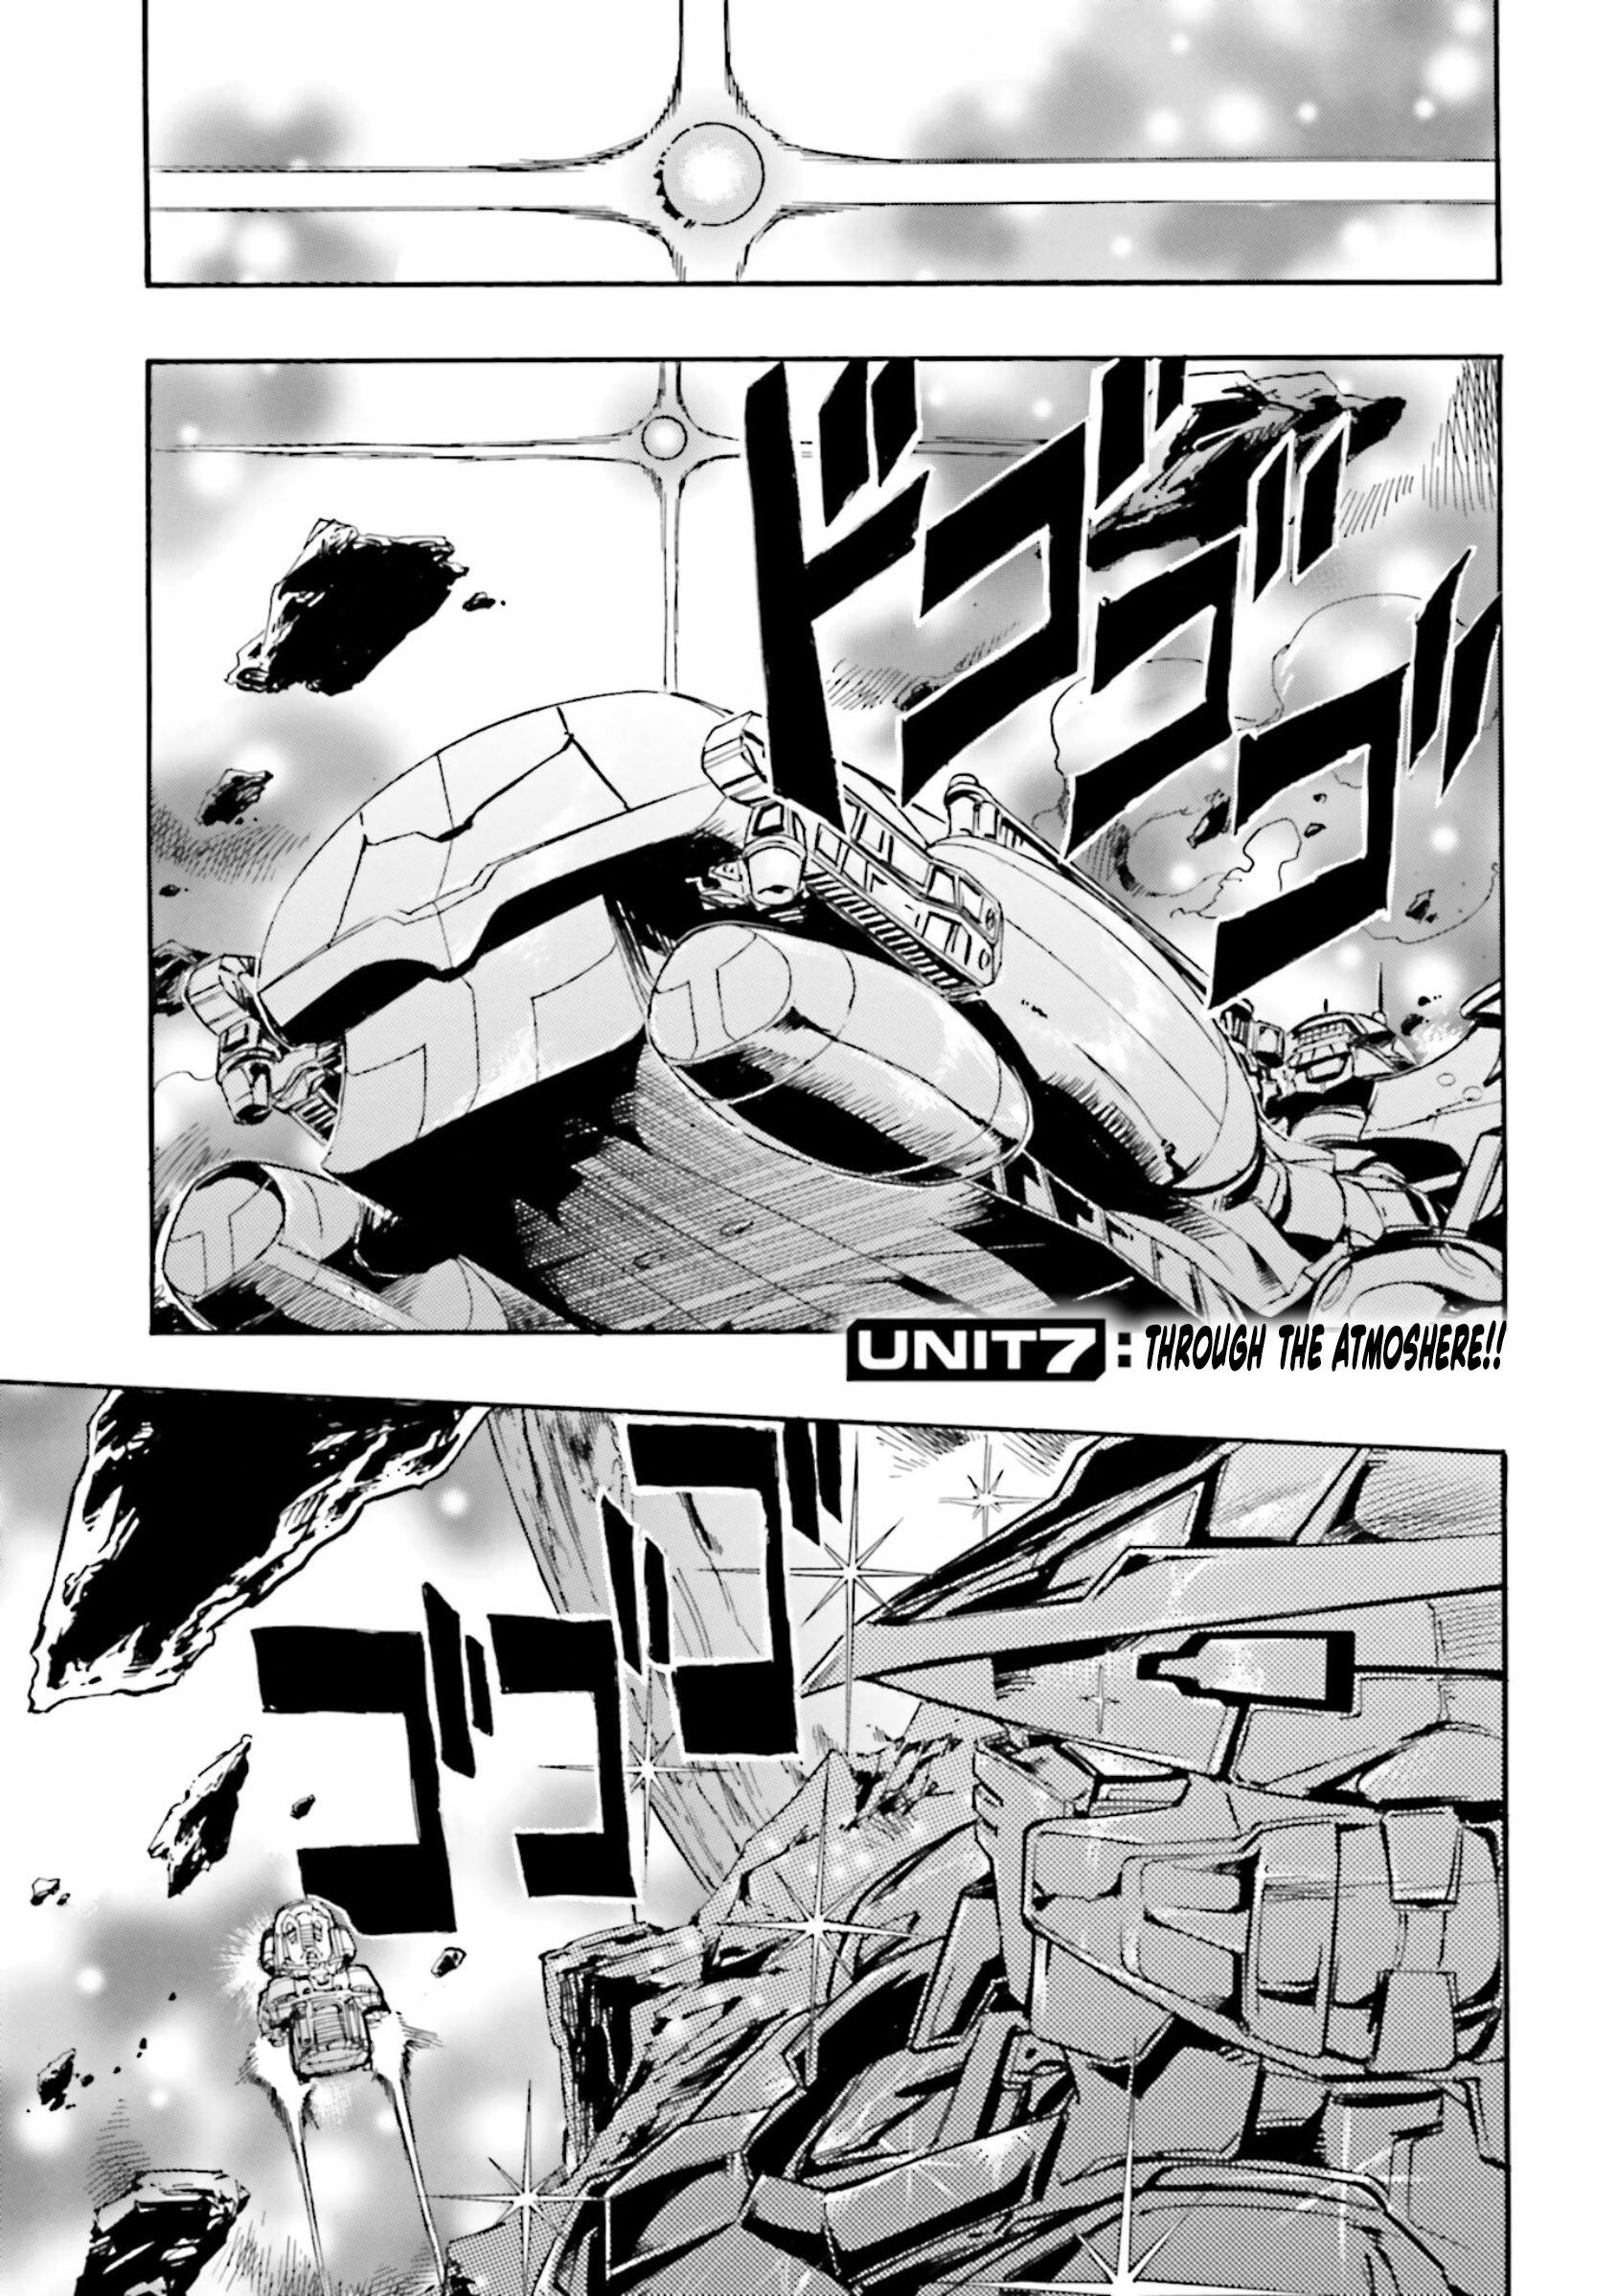 Mobile Suit Gundam Seed Astray R Vol.2 Chapter 7: Through The Atmosphere!! - Picture 1